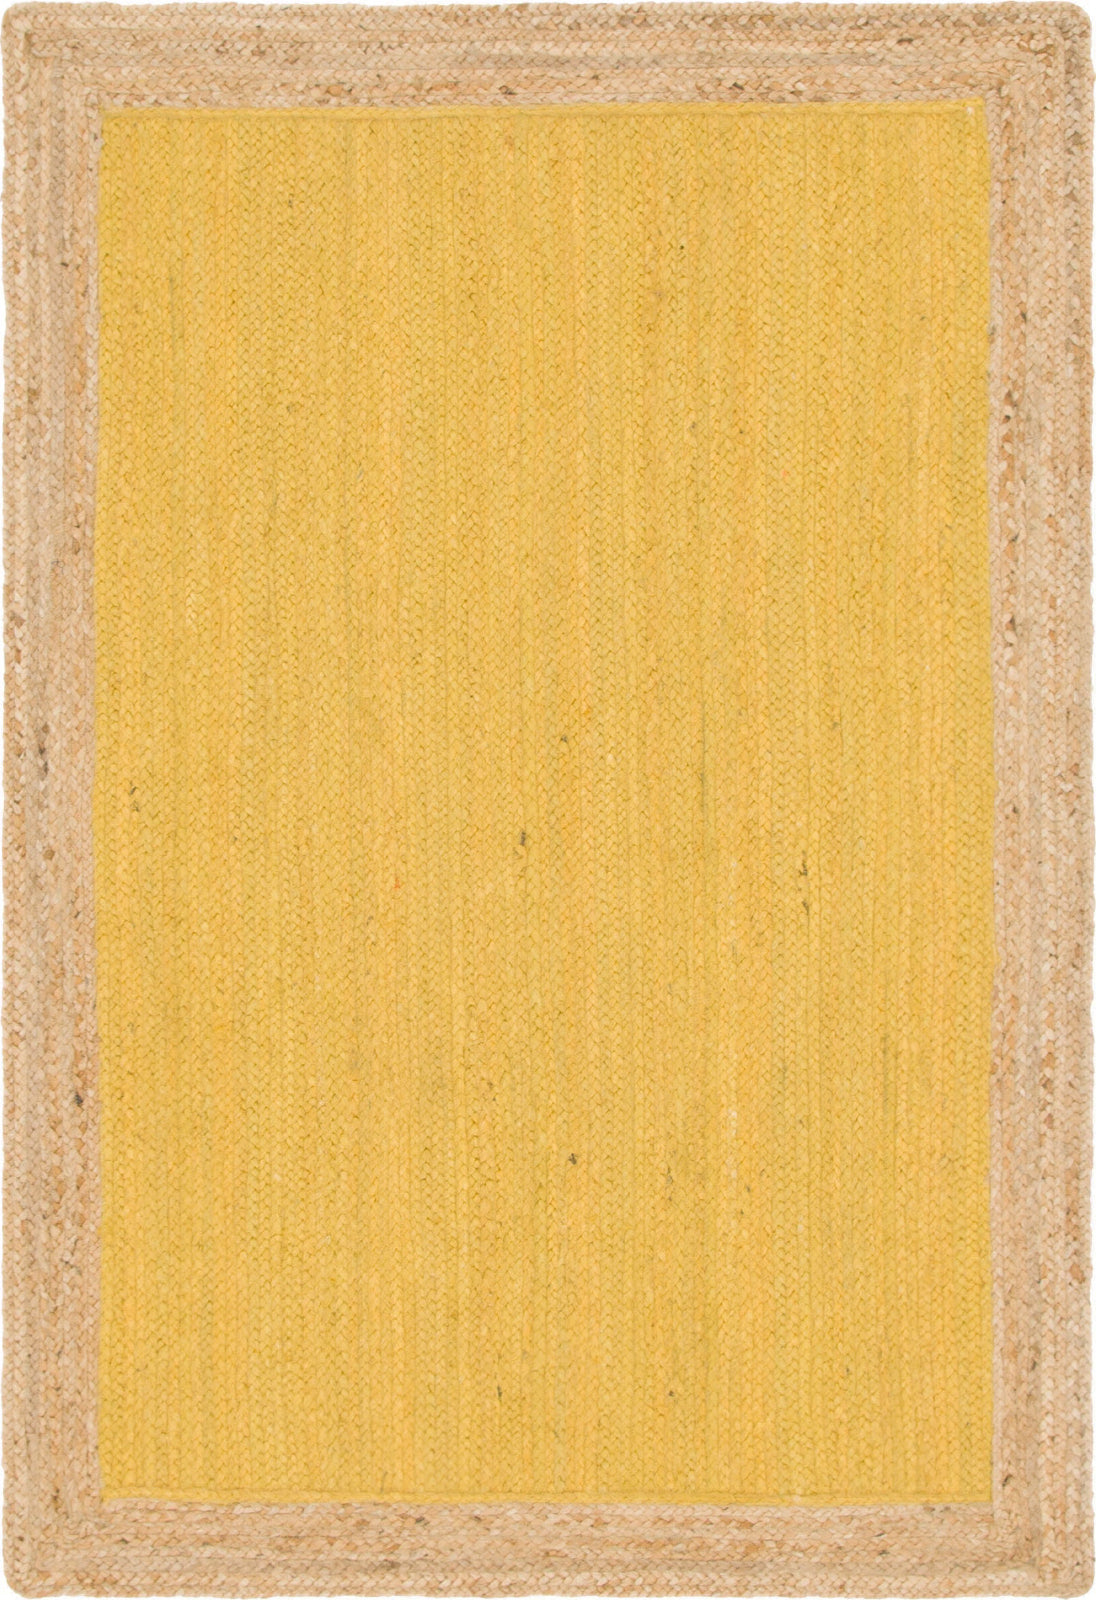 Unique Loom Braided Jute MGN-4 Yellow Area Rug main image